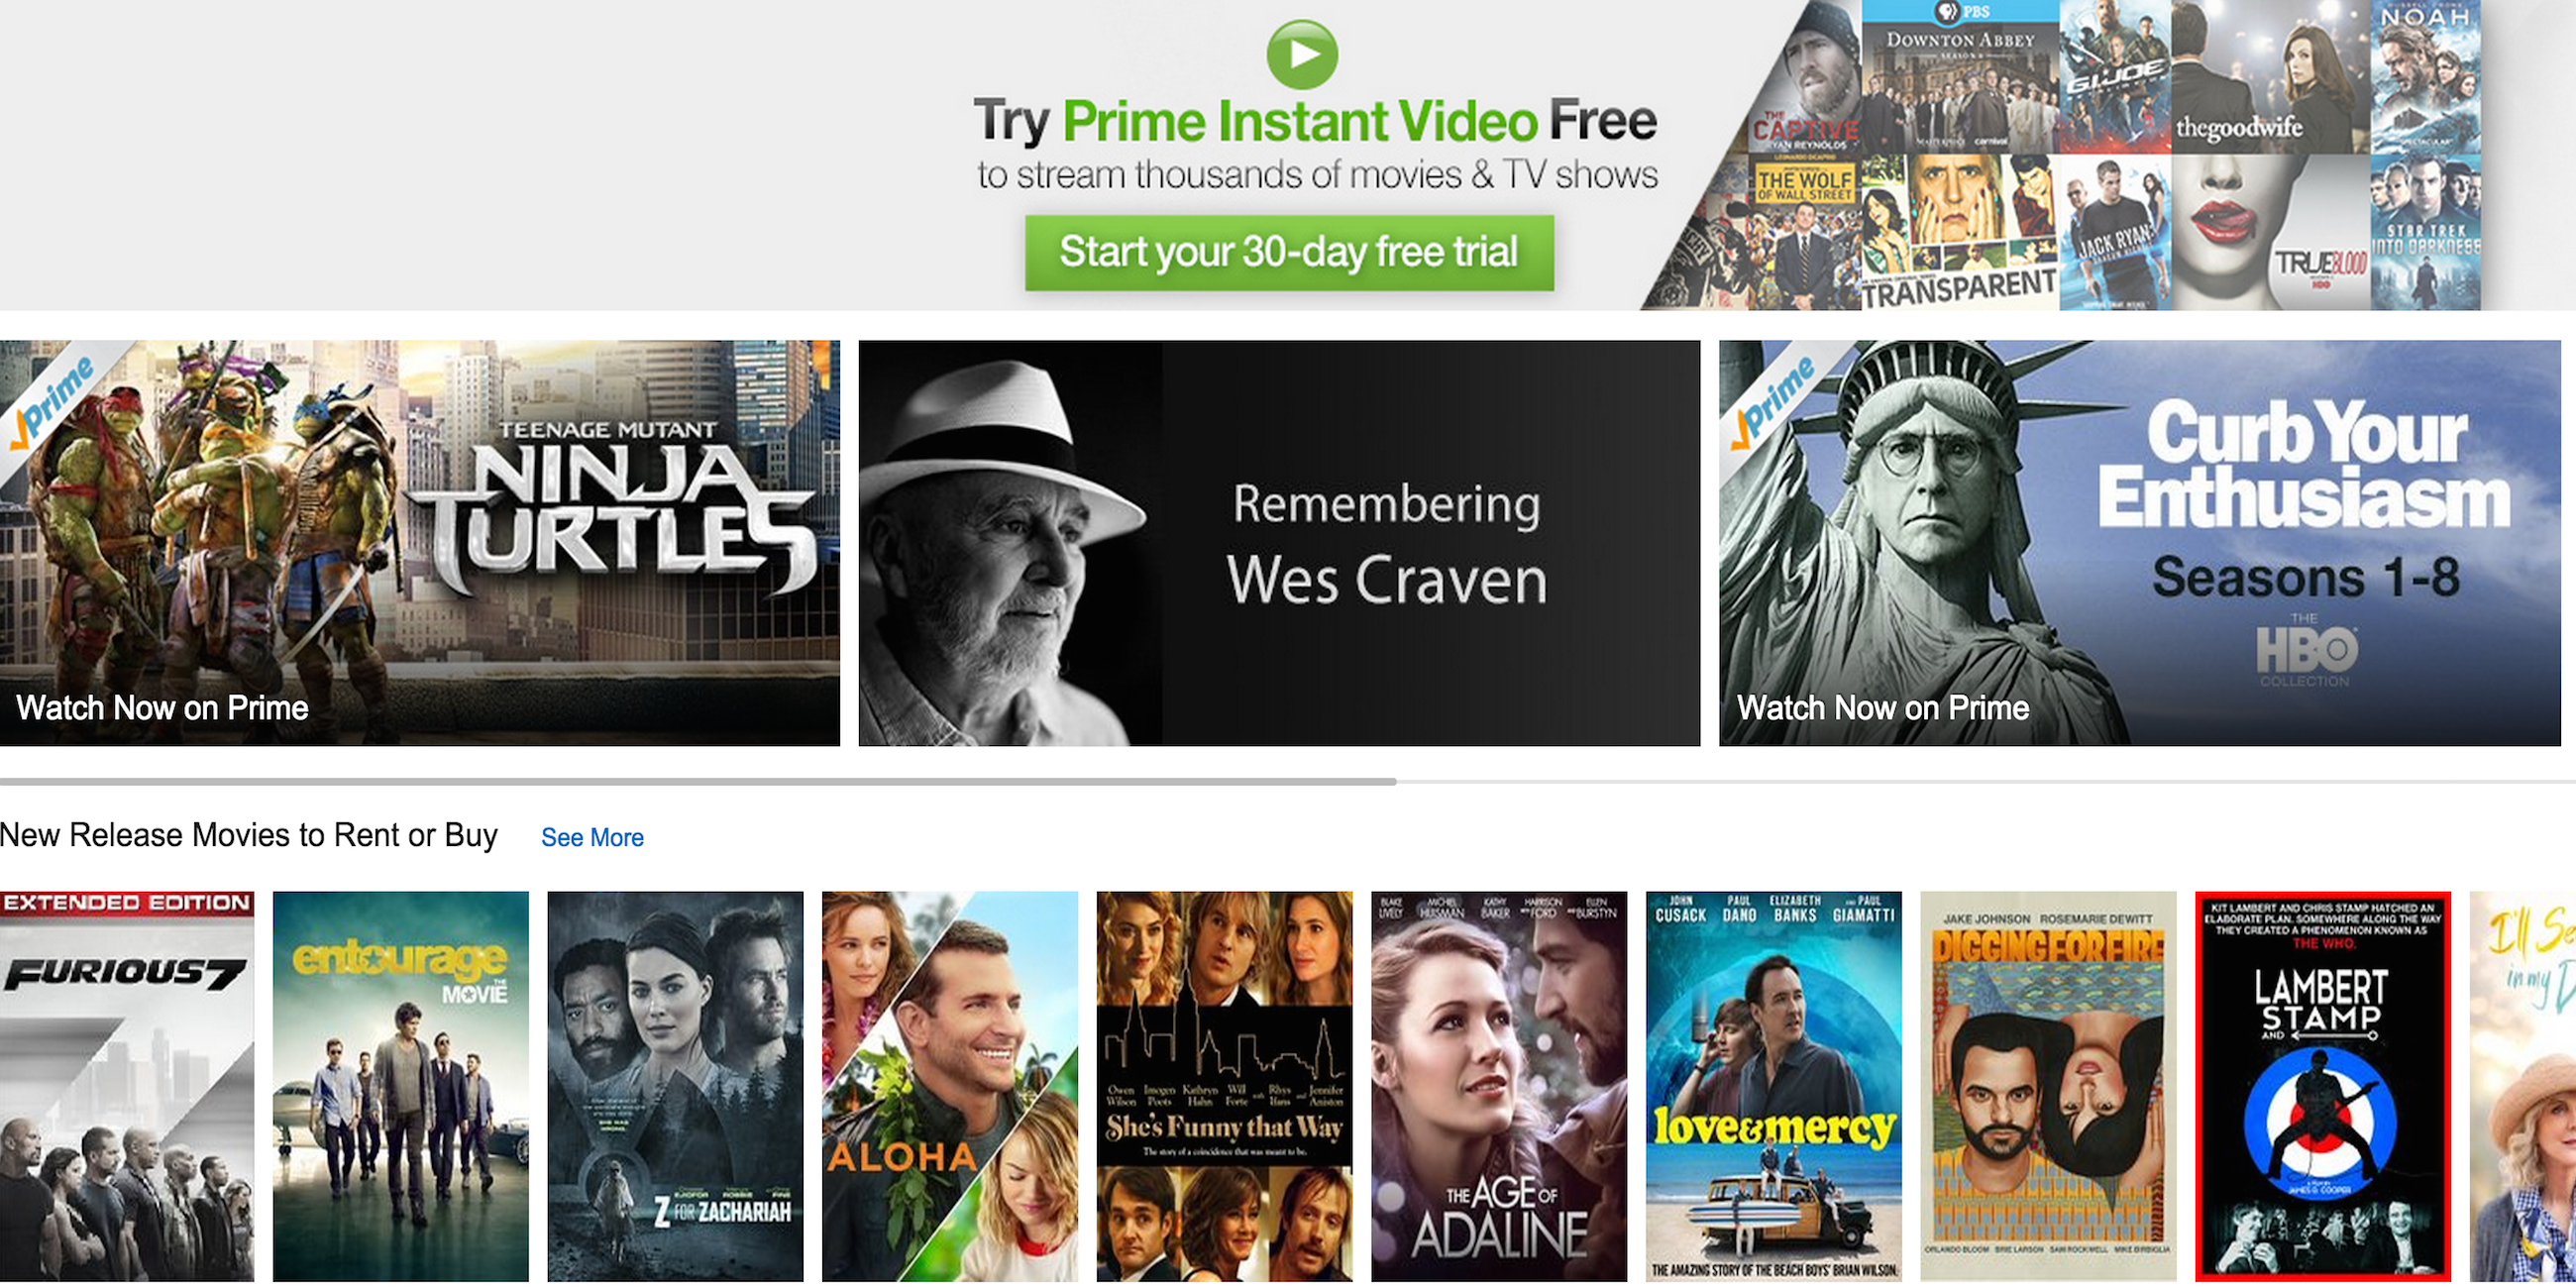 Amazon Prime Video now offers downloads for offline viewing on iPhone and iPad users